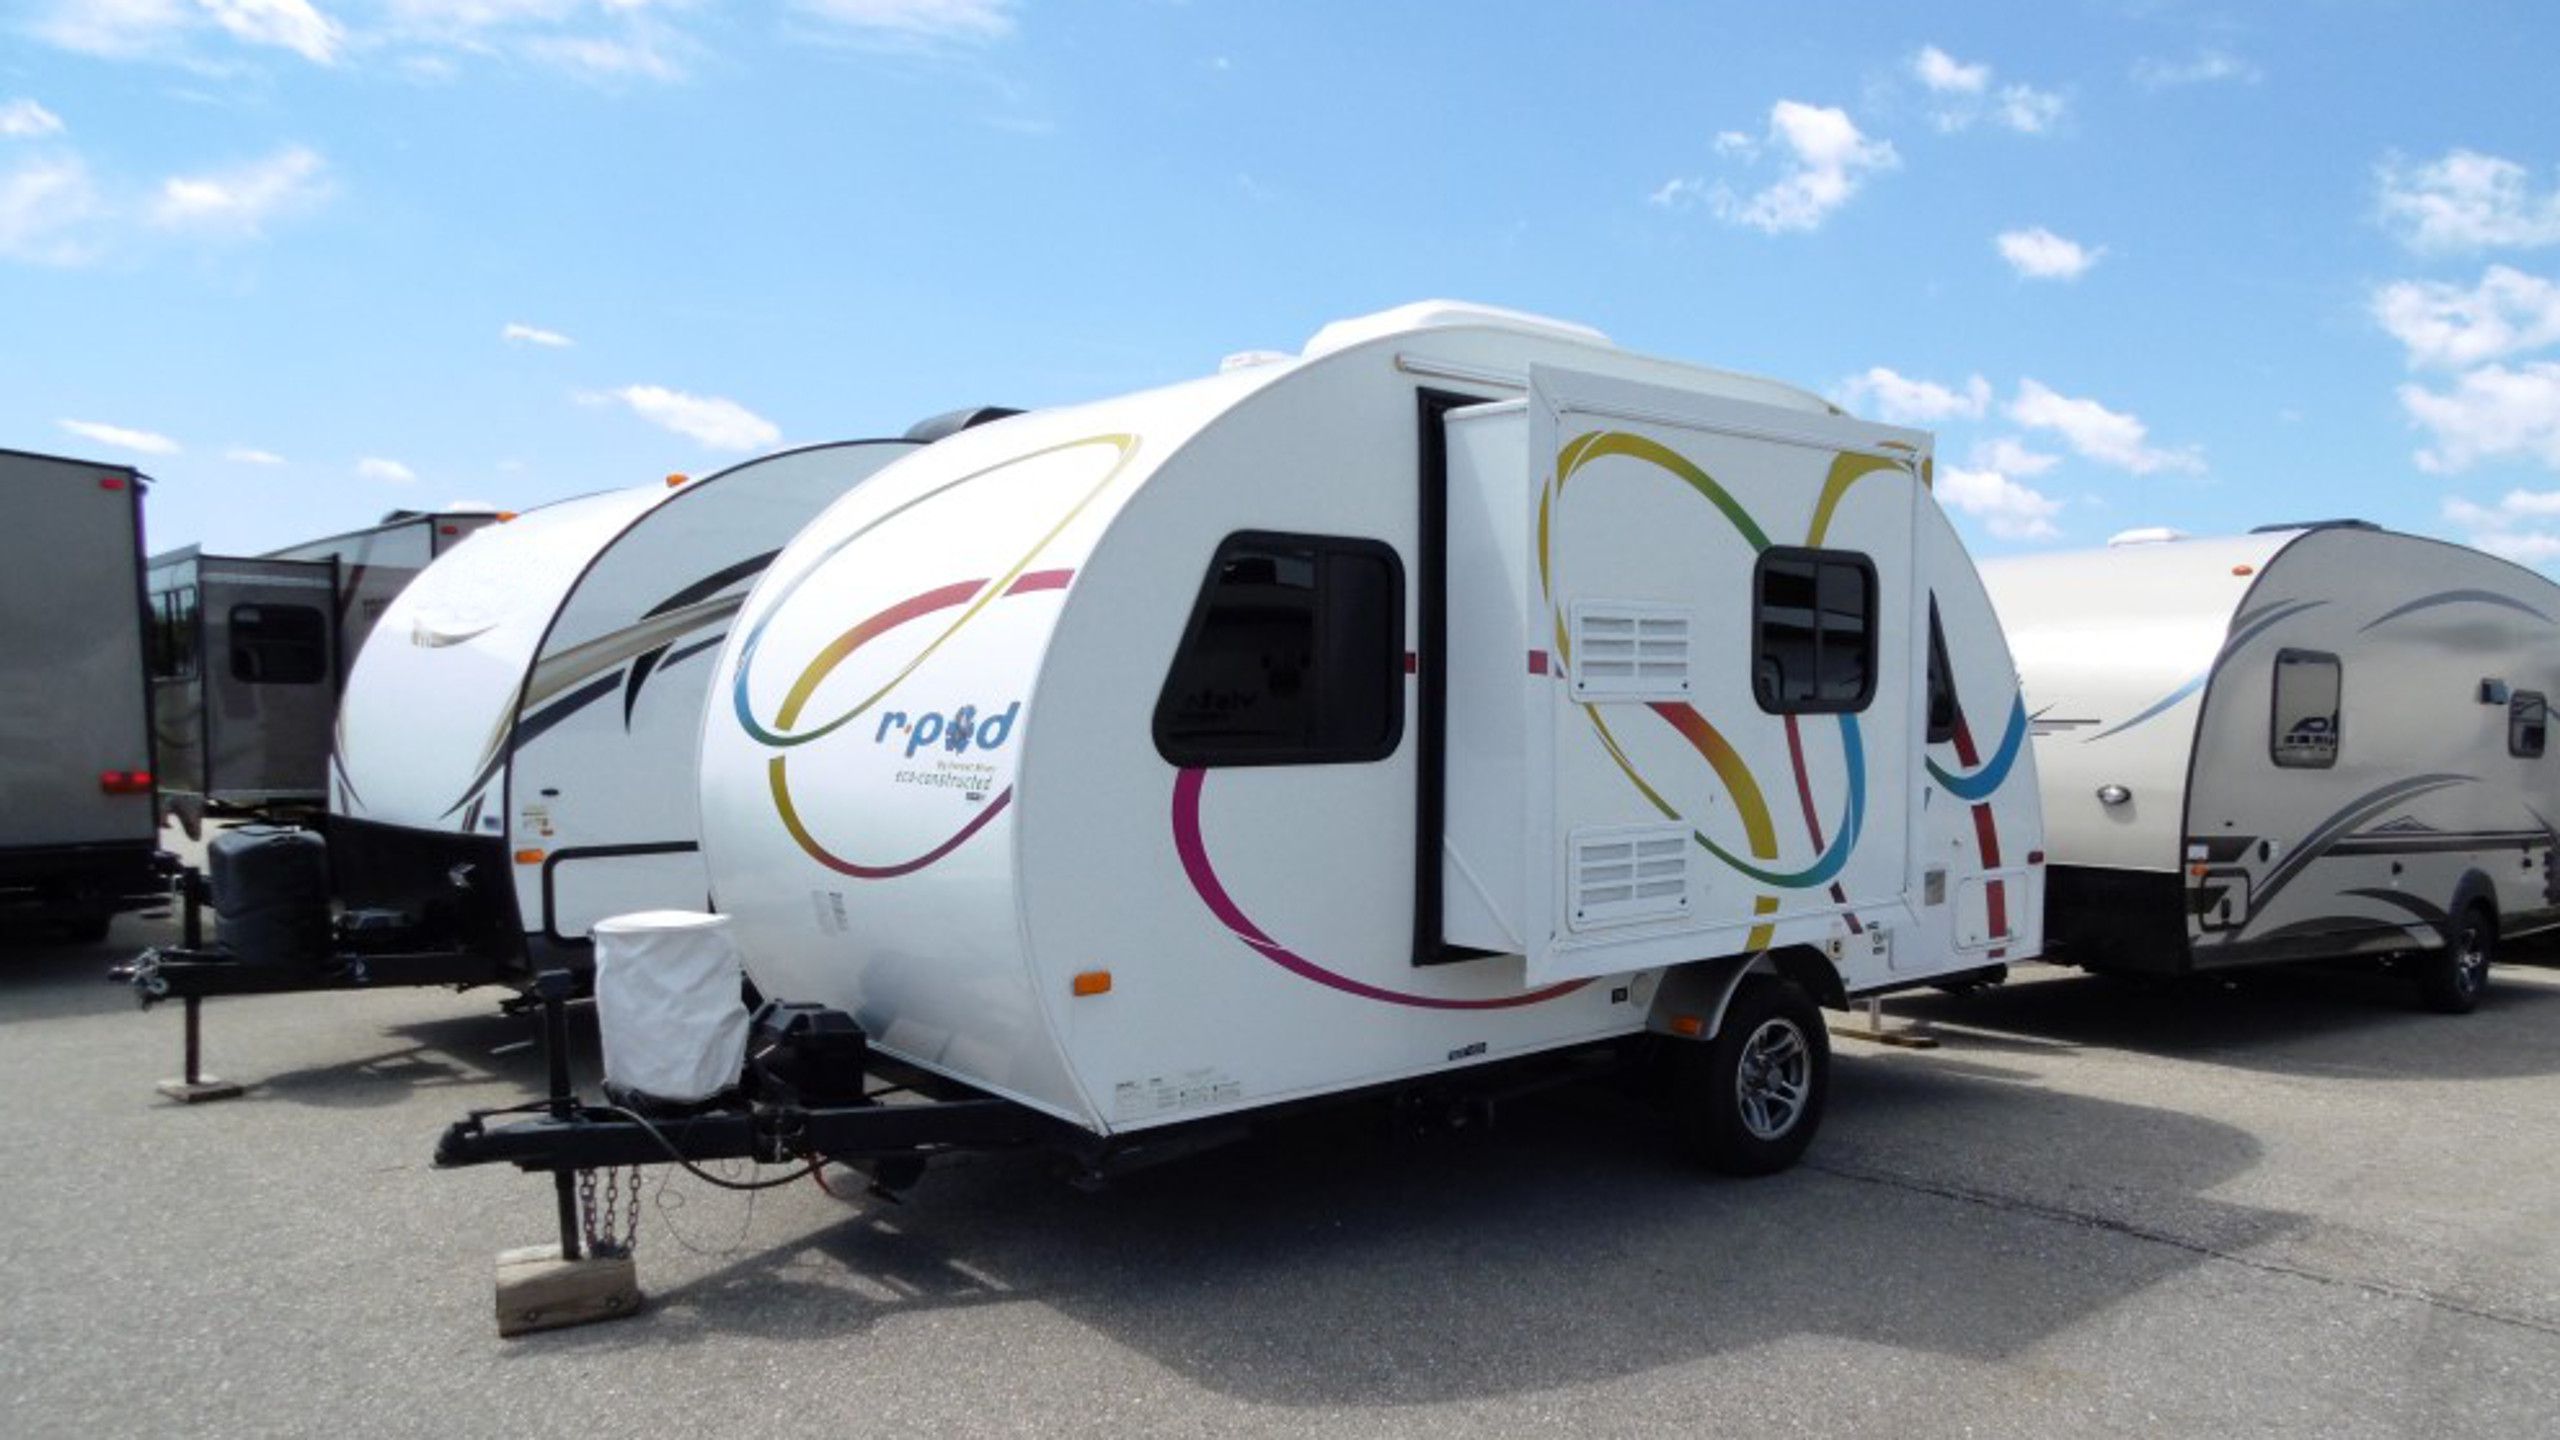 View Can-Am RV Centre RVs for sale | 11 - 20 of 47 units